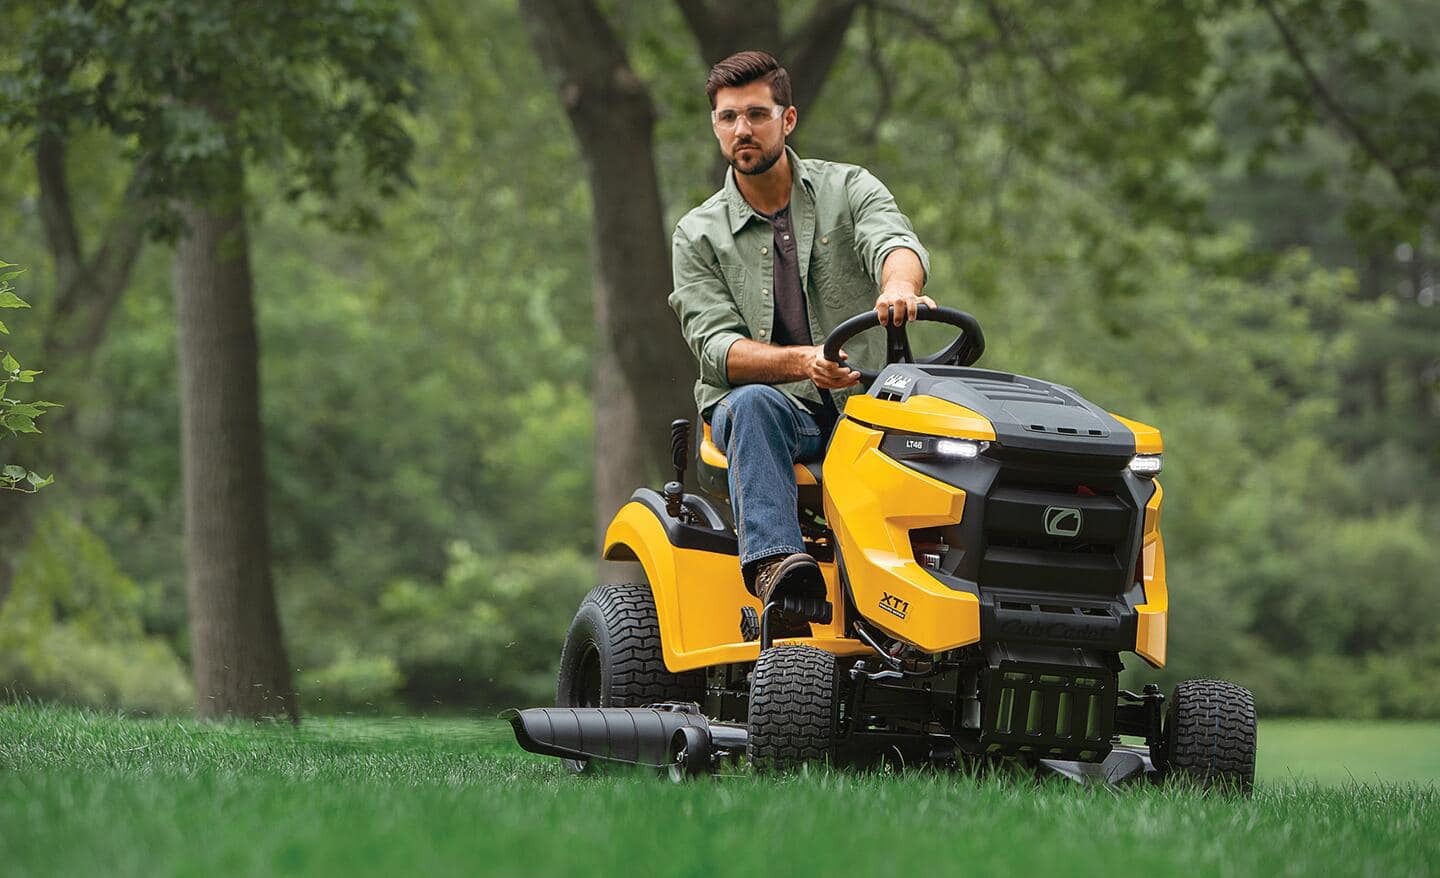 A man in a green shirt riding on a yellow lawn mower. 